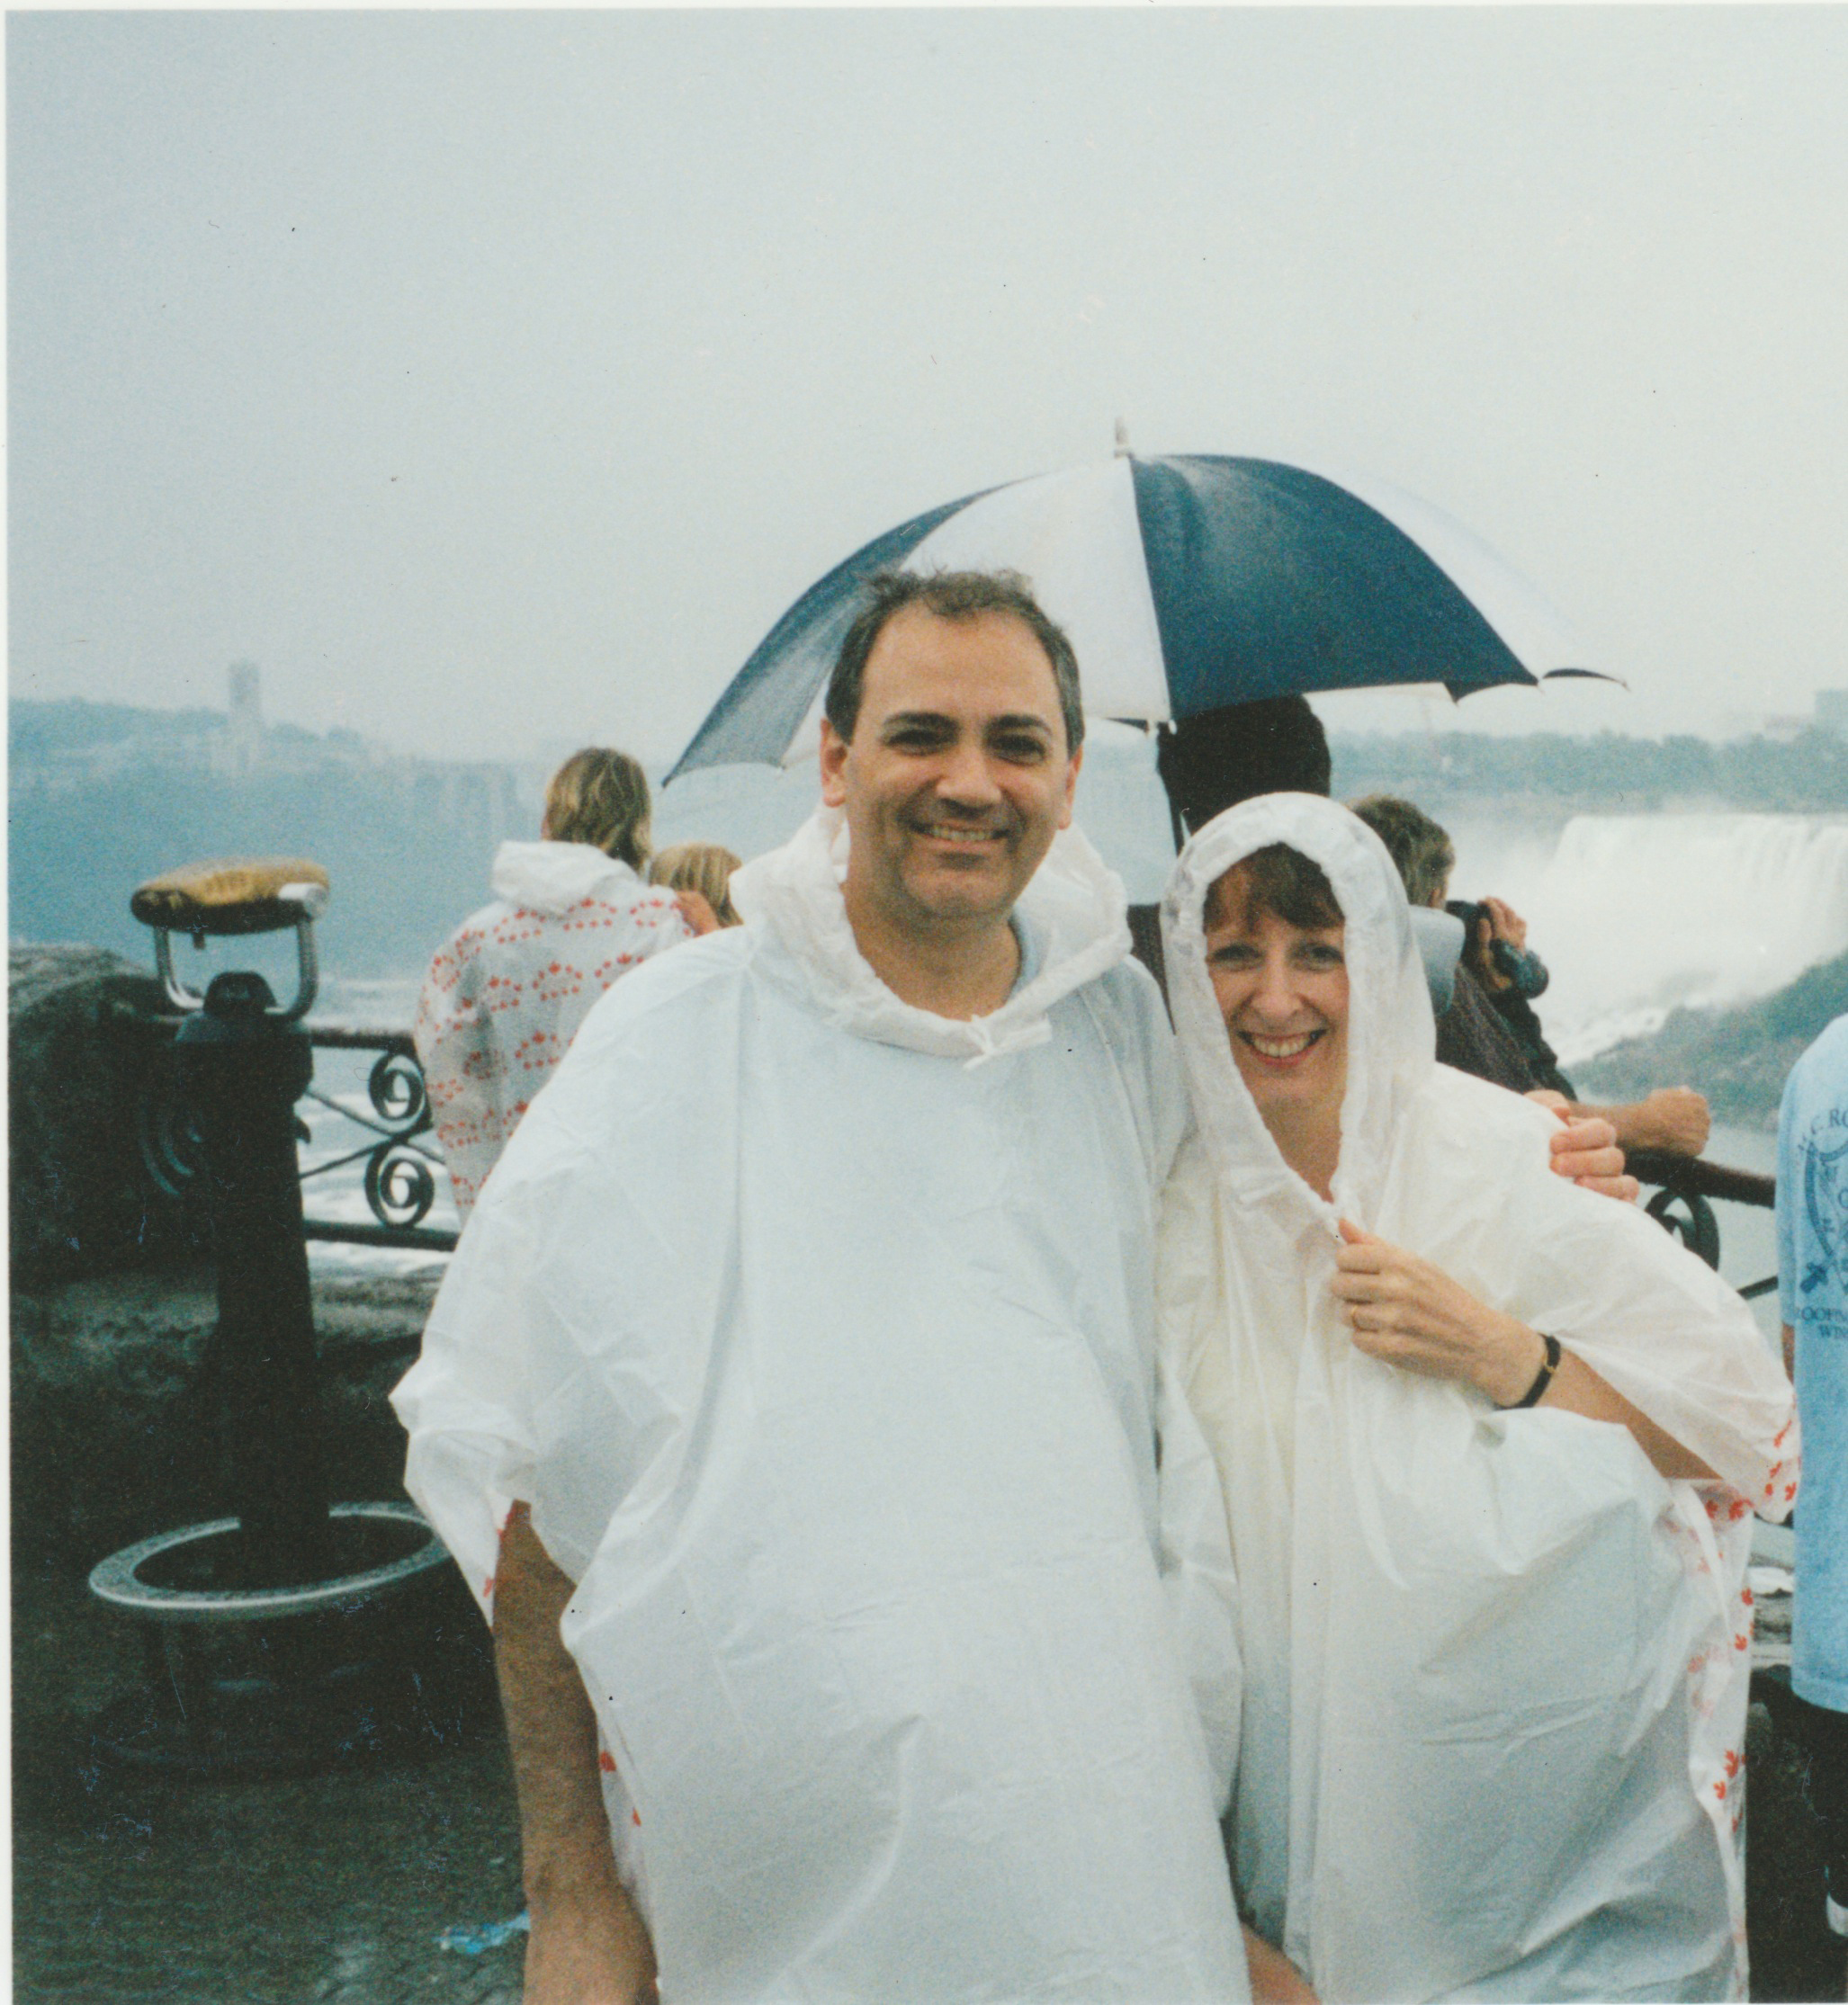 Charles G. Wolf with his late wife Katherine at Niagra Falls, 3 weeks before 9/11 (Courtesy of Charles G. Wolf)